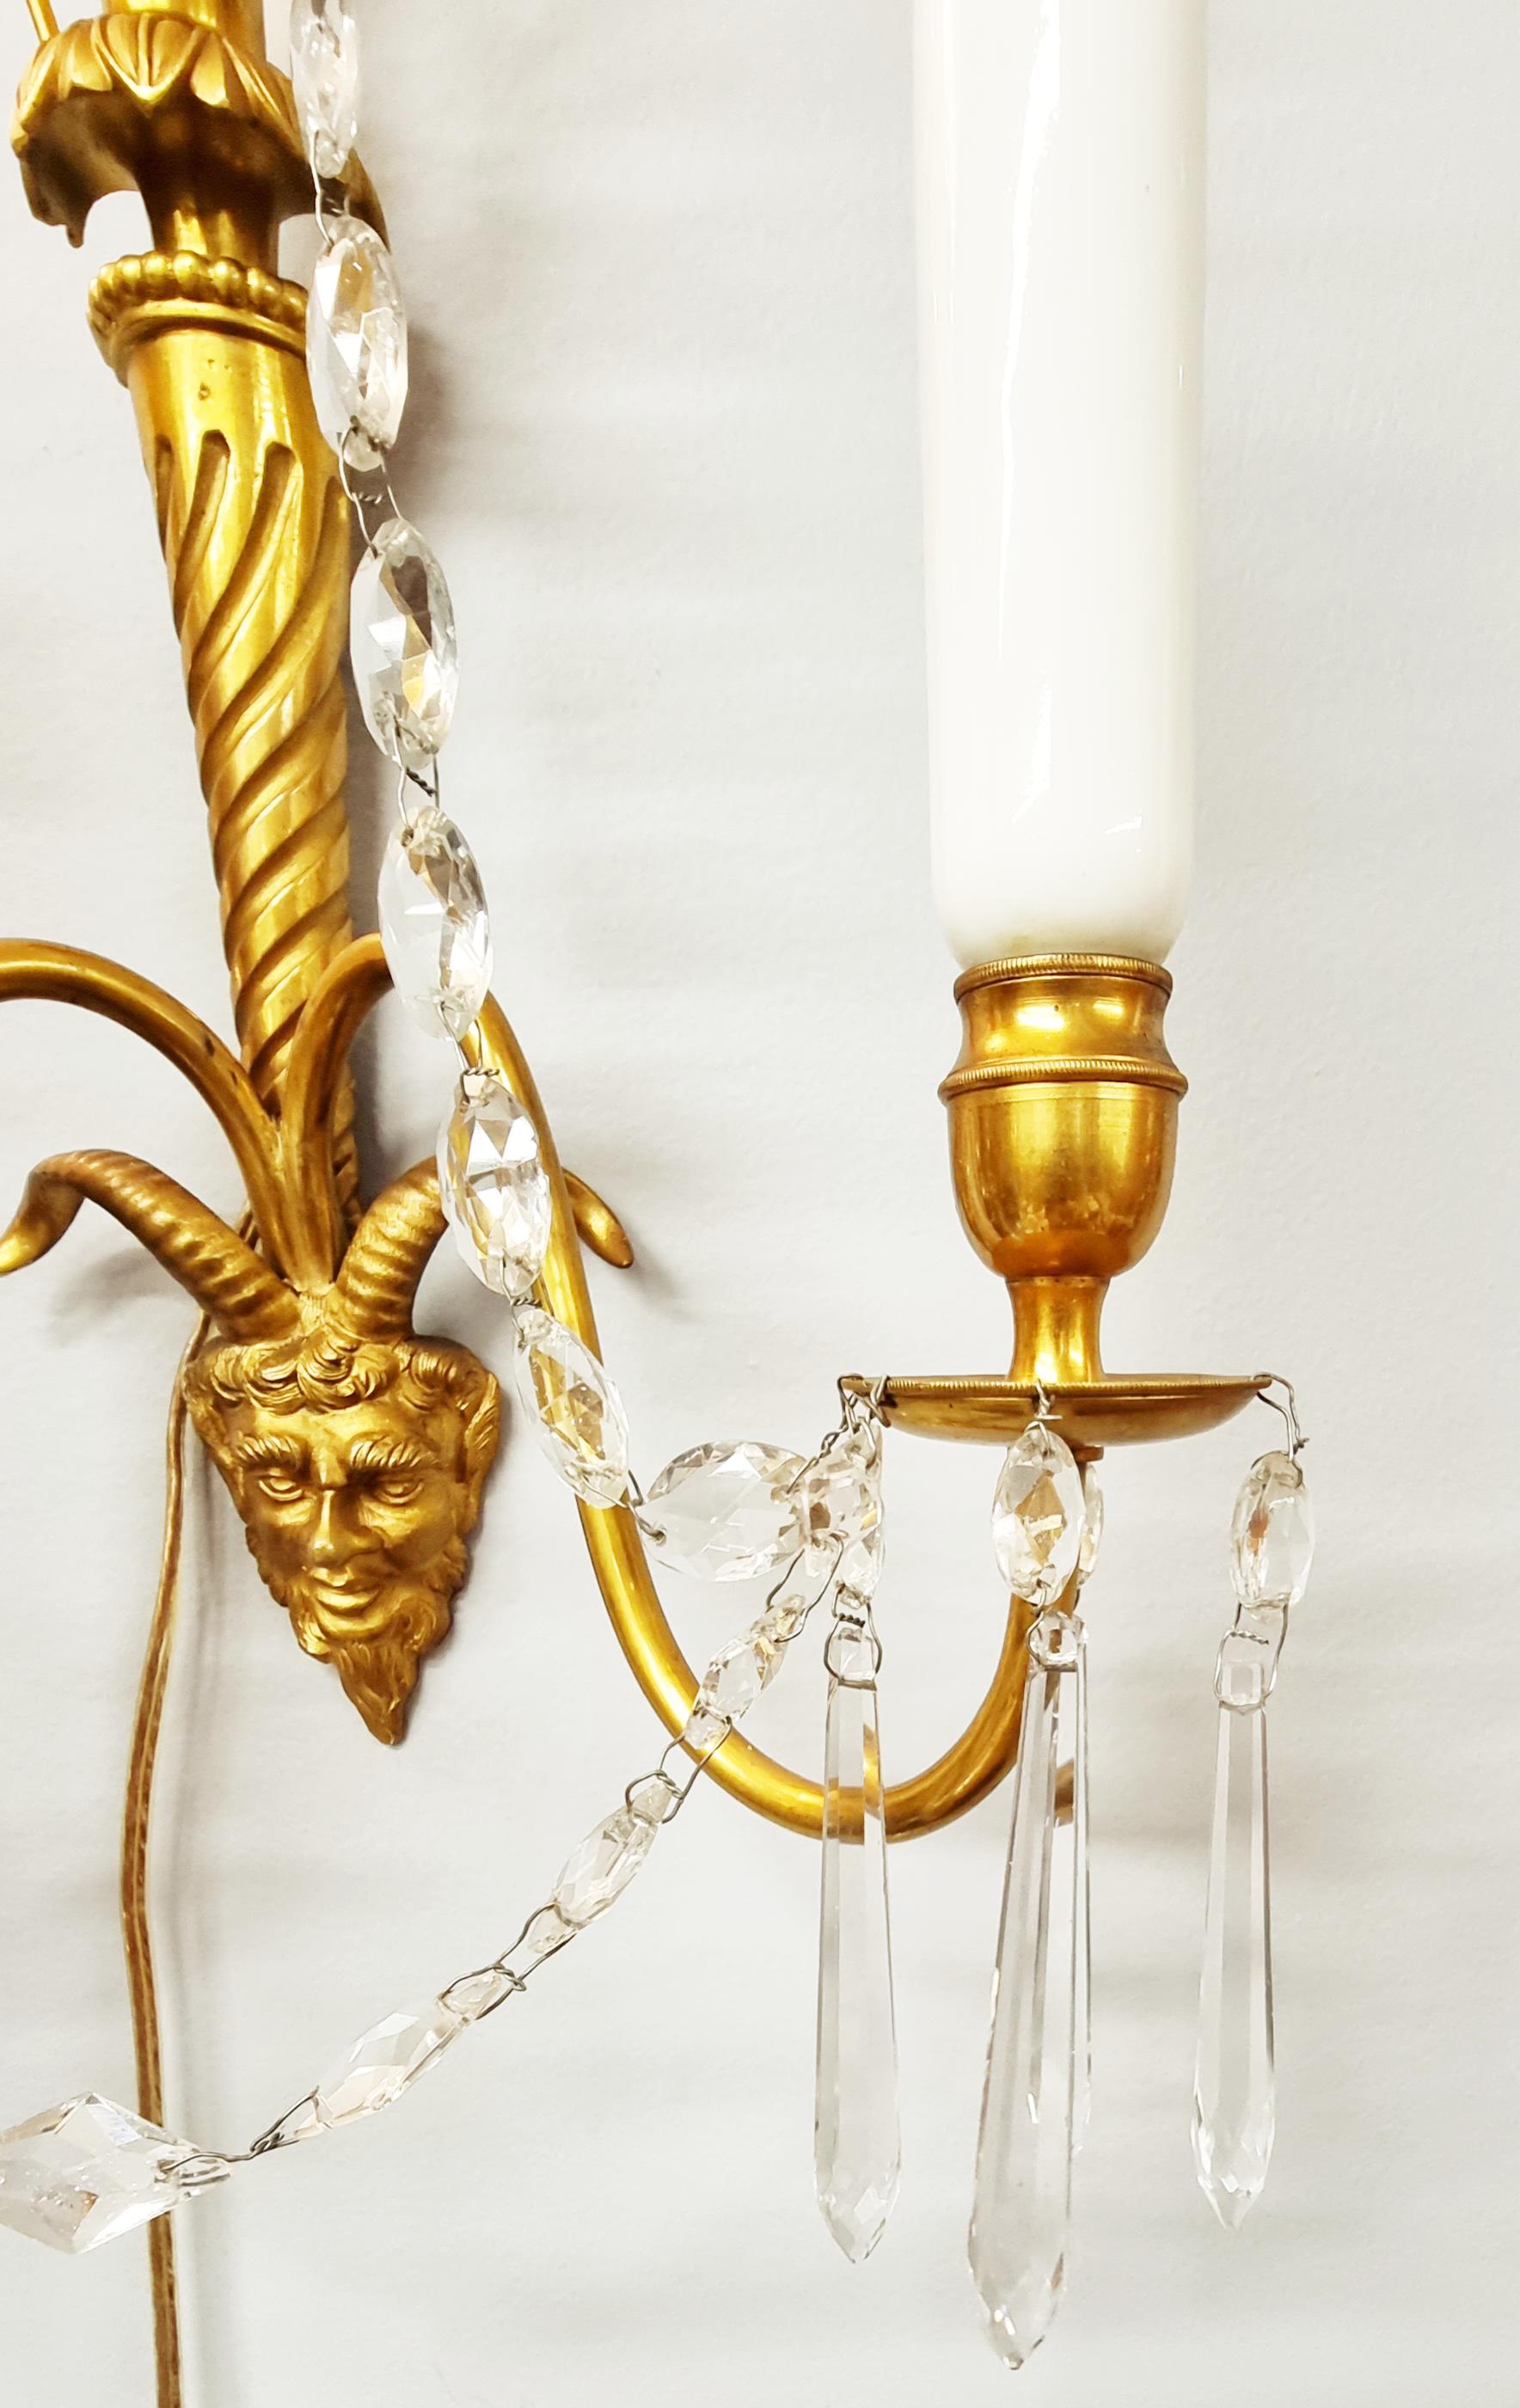 Pair of Baltic Gilt Satyr Faun Head Wall Sconces, Late 19th / Early 20th Century In Good Condition For Sale In Ottawa, Ontario